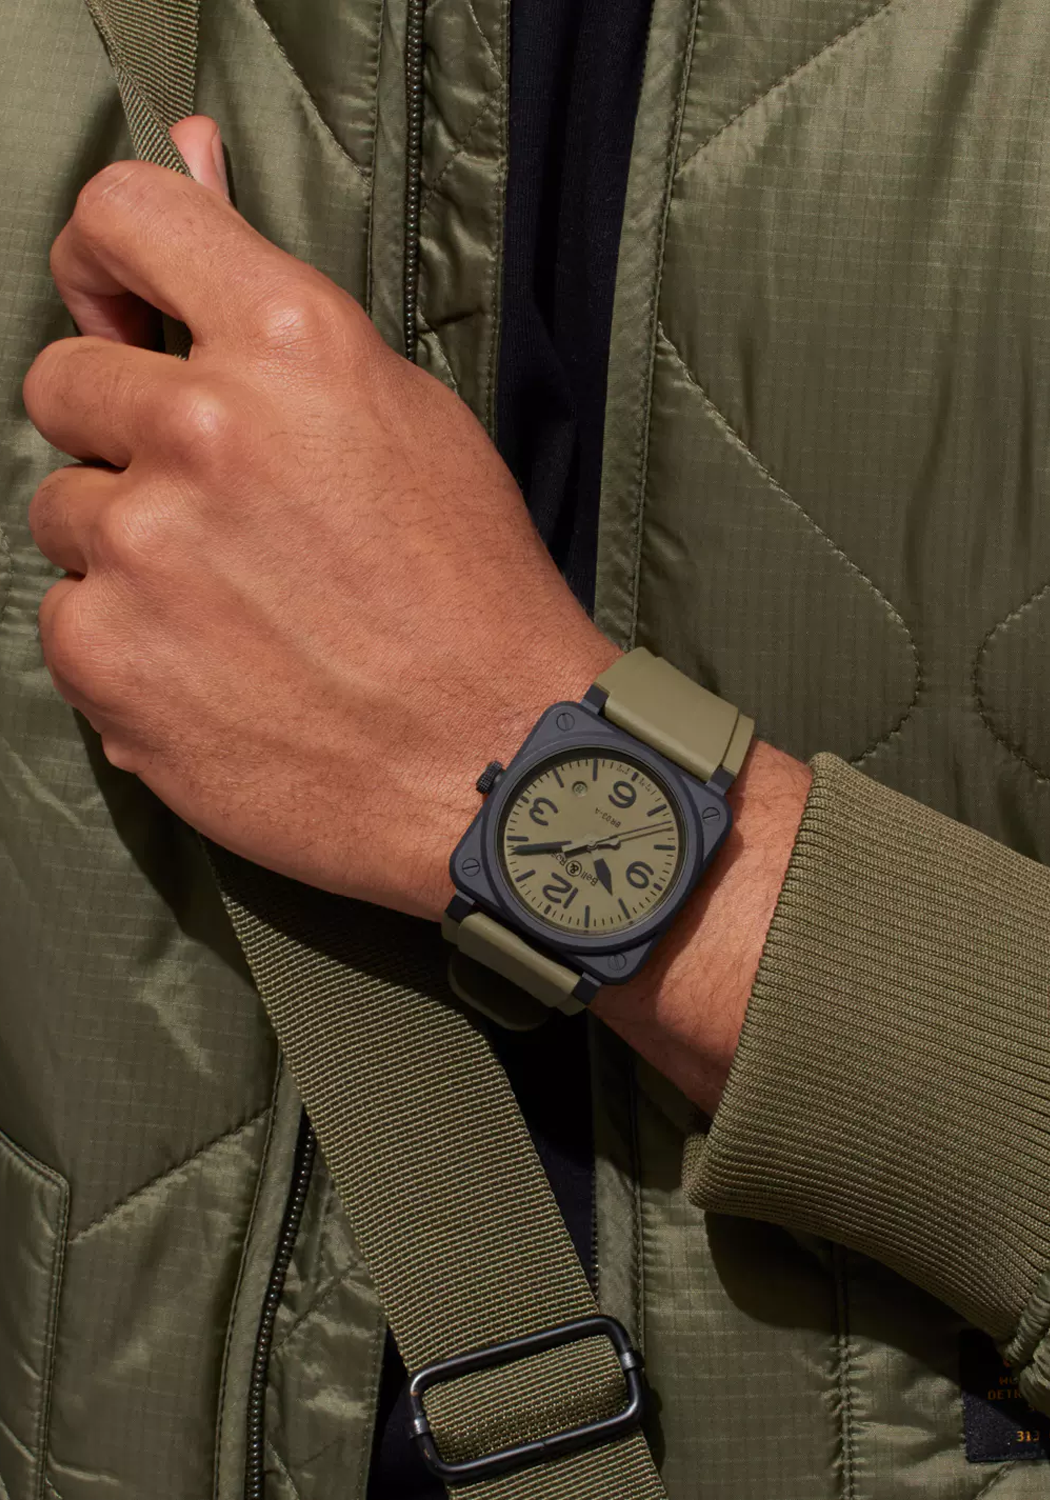 Bell & Ross New BR 03 Military Ceramic on the wrist | Ref. BR03A-MIL-CE/SRB | OsterJewelers.com